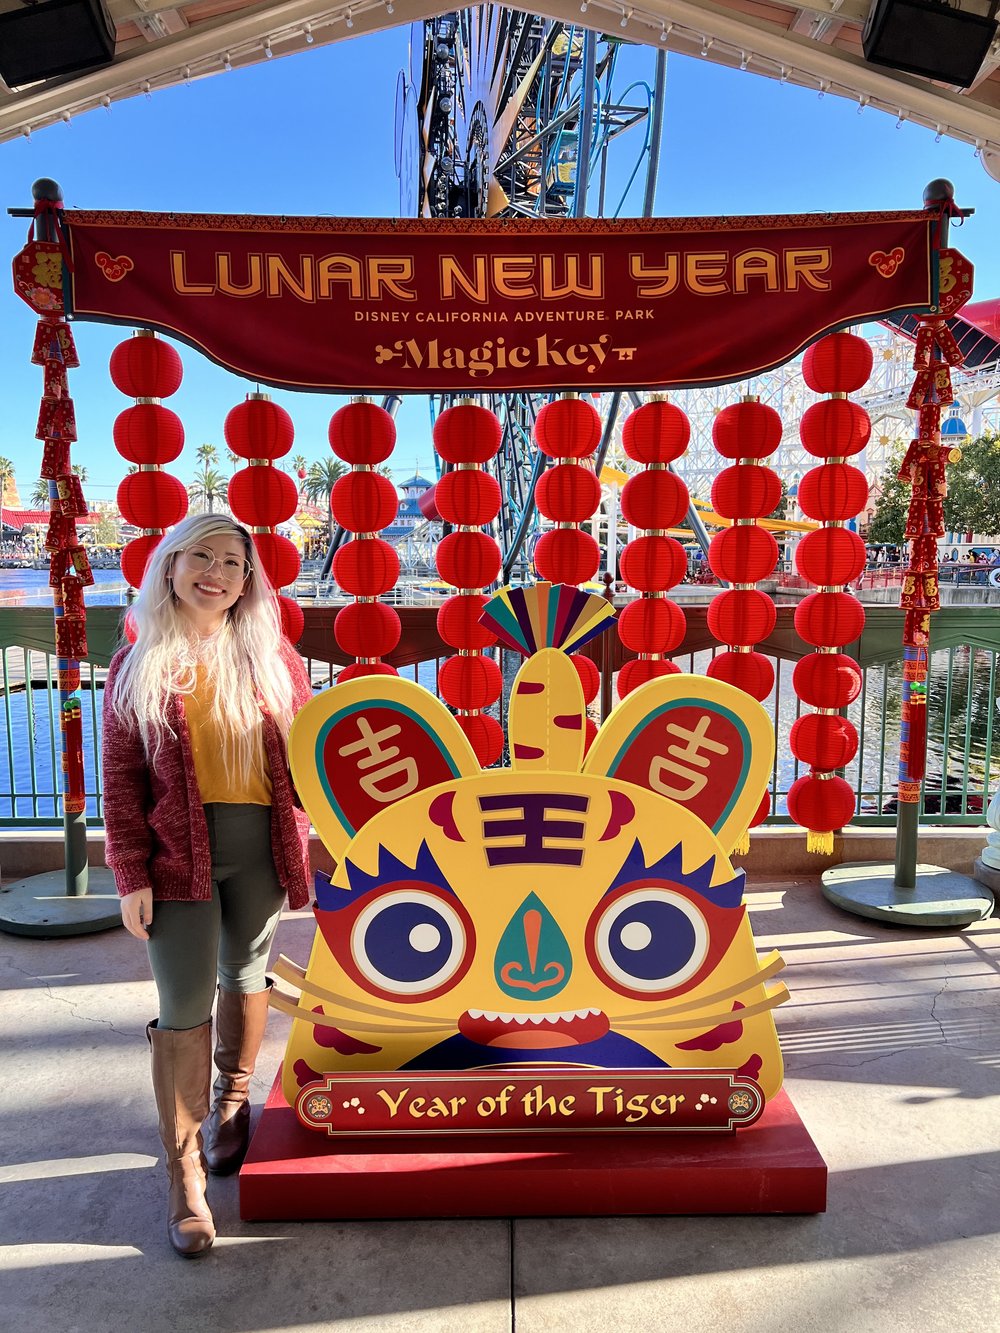  A girl with blond hair and a yellow top with red cardigan and green pants standing next to a cardboard image of a cartoon tiger with a Year of the Tiger banner at the bottom and a Lunar New Year banner at the top 